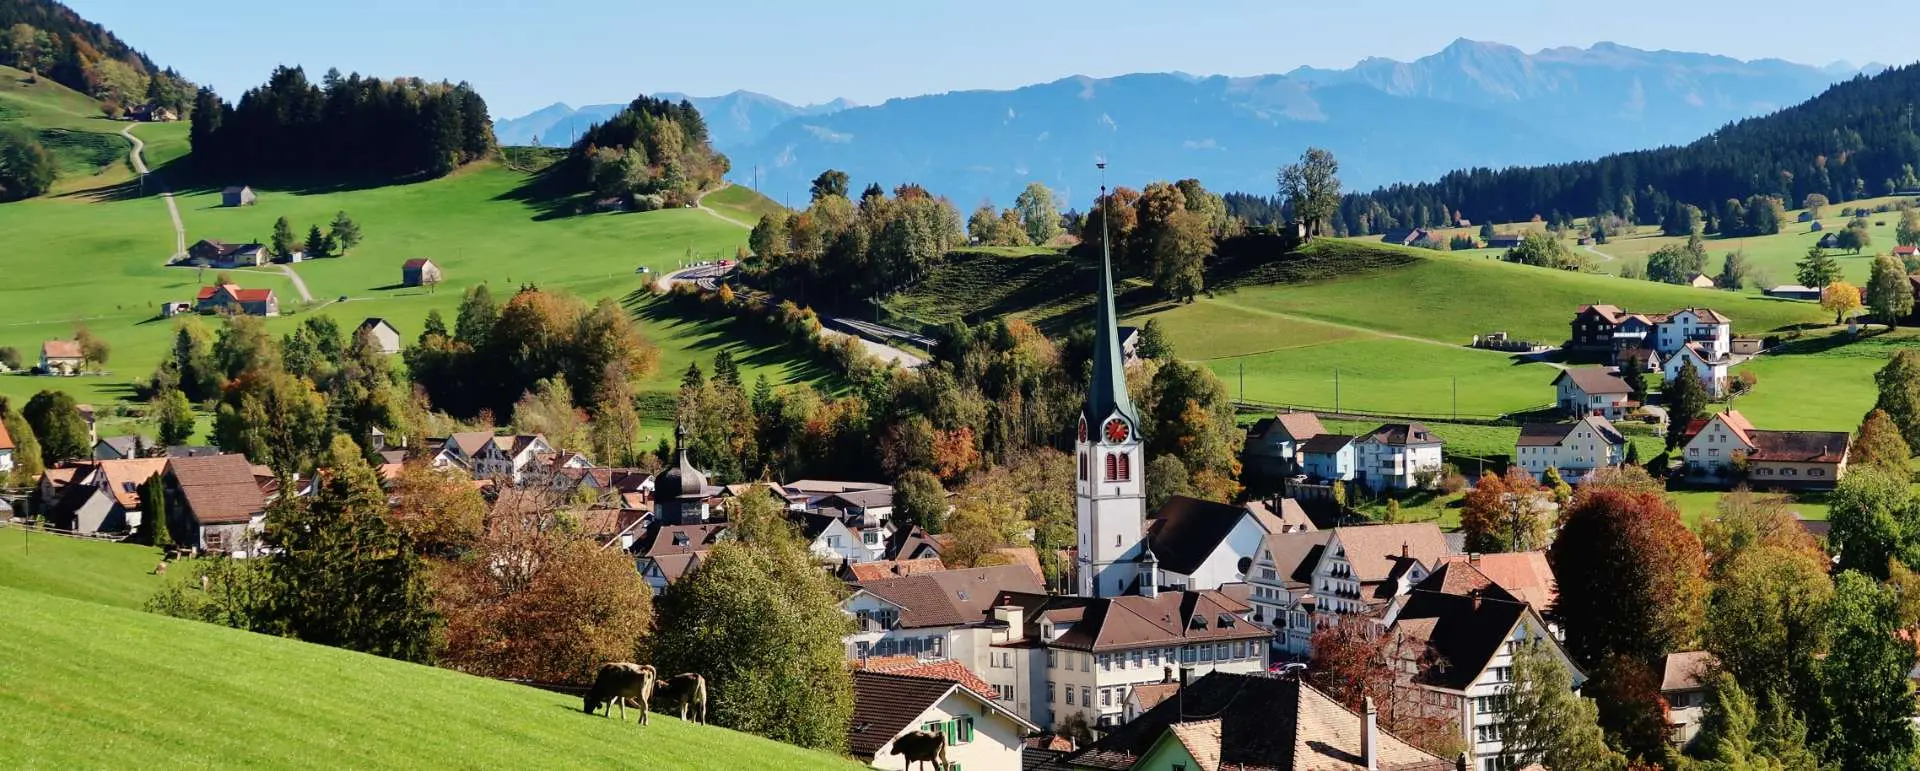 Appenzell - the destination for families